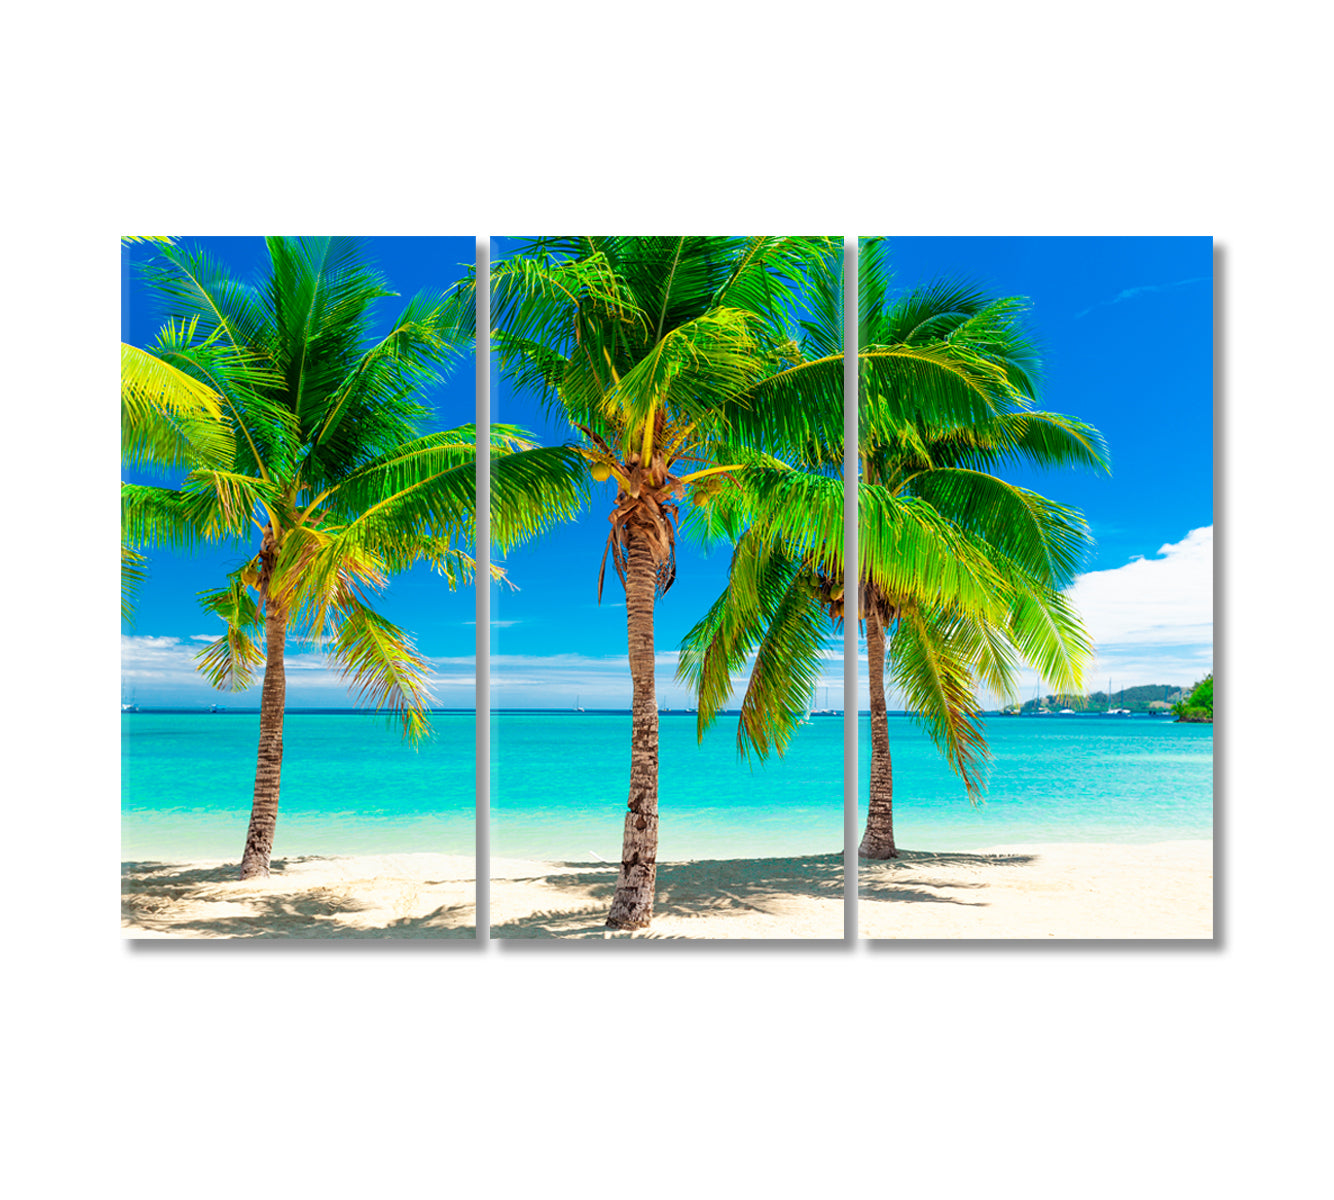 Tropical Beach with Coconut Palm Trees Canvas Print-Canvas Print-CetArt-3 Panels-36x24 inches-CetArt